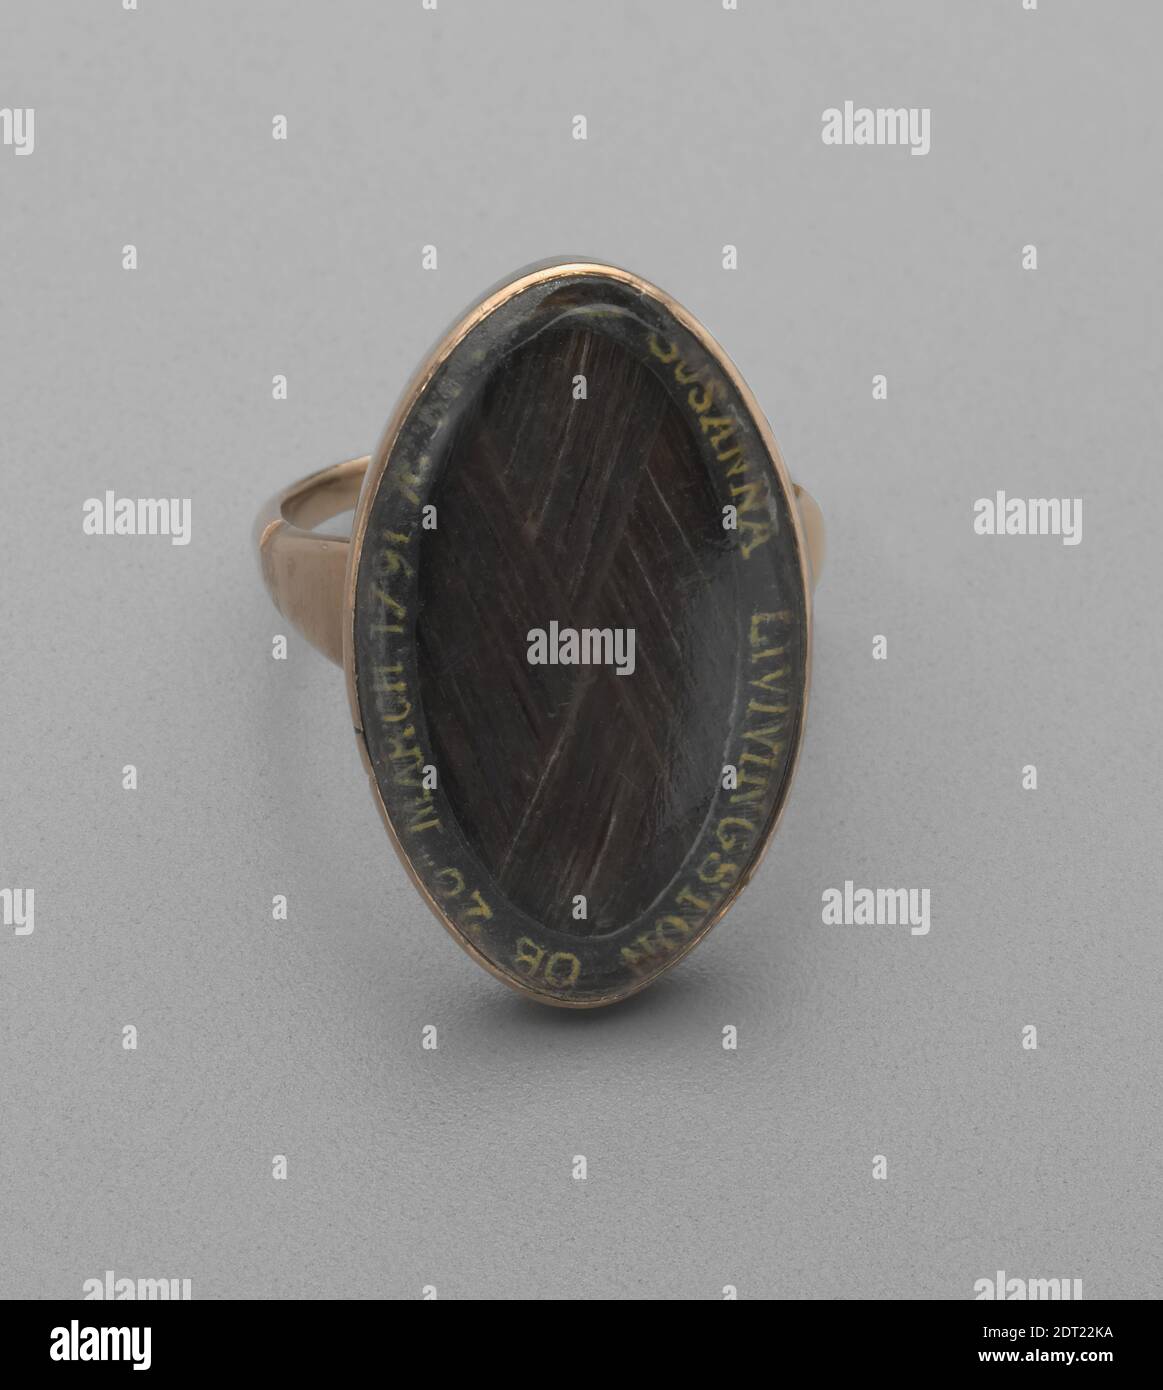 Honorand: Susanna Smith Livingston, American, 1729–1791, Mourning Ring, Gold with glass, and hair, 15/16 × 11/16 in. (2.38 × 1.75 cm), Made in New York, United States, American, 18th century, Jewelry Stock Photo